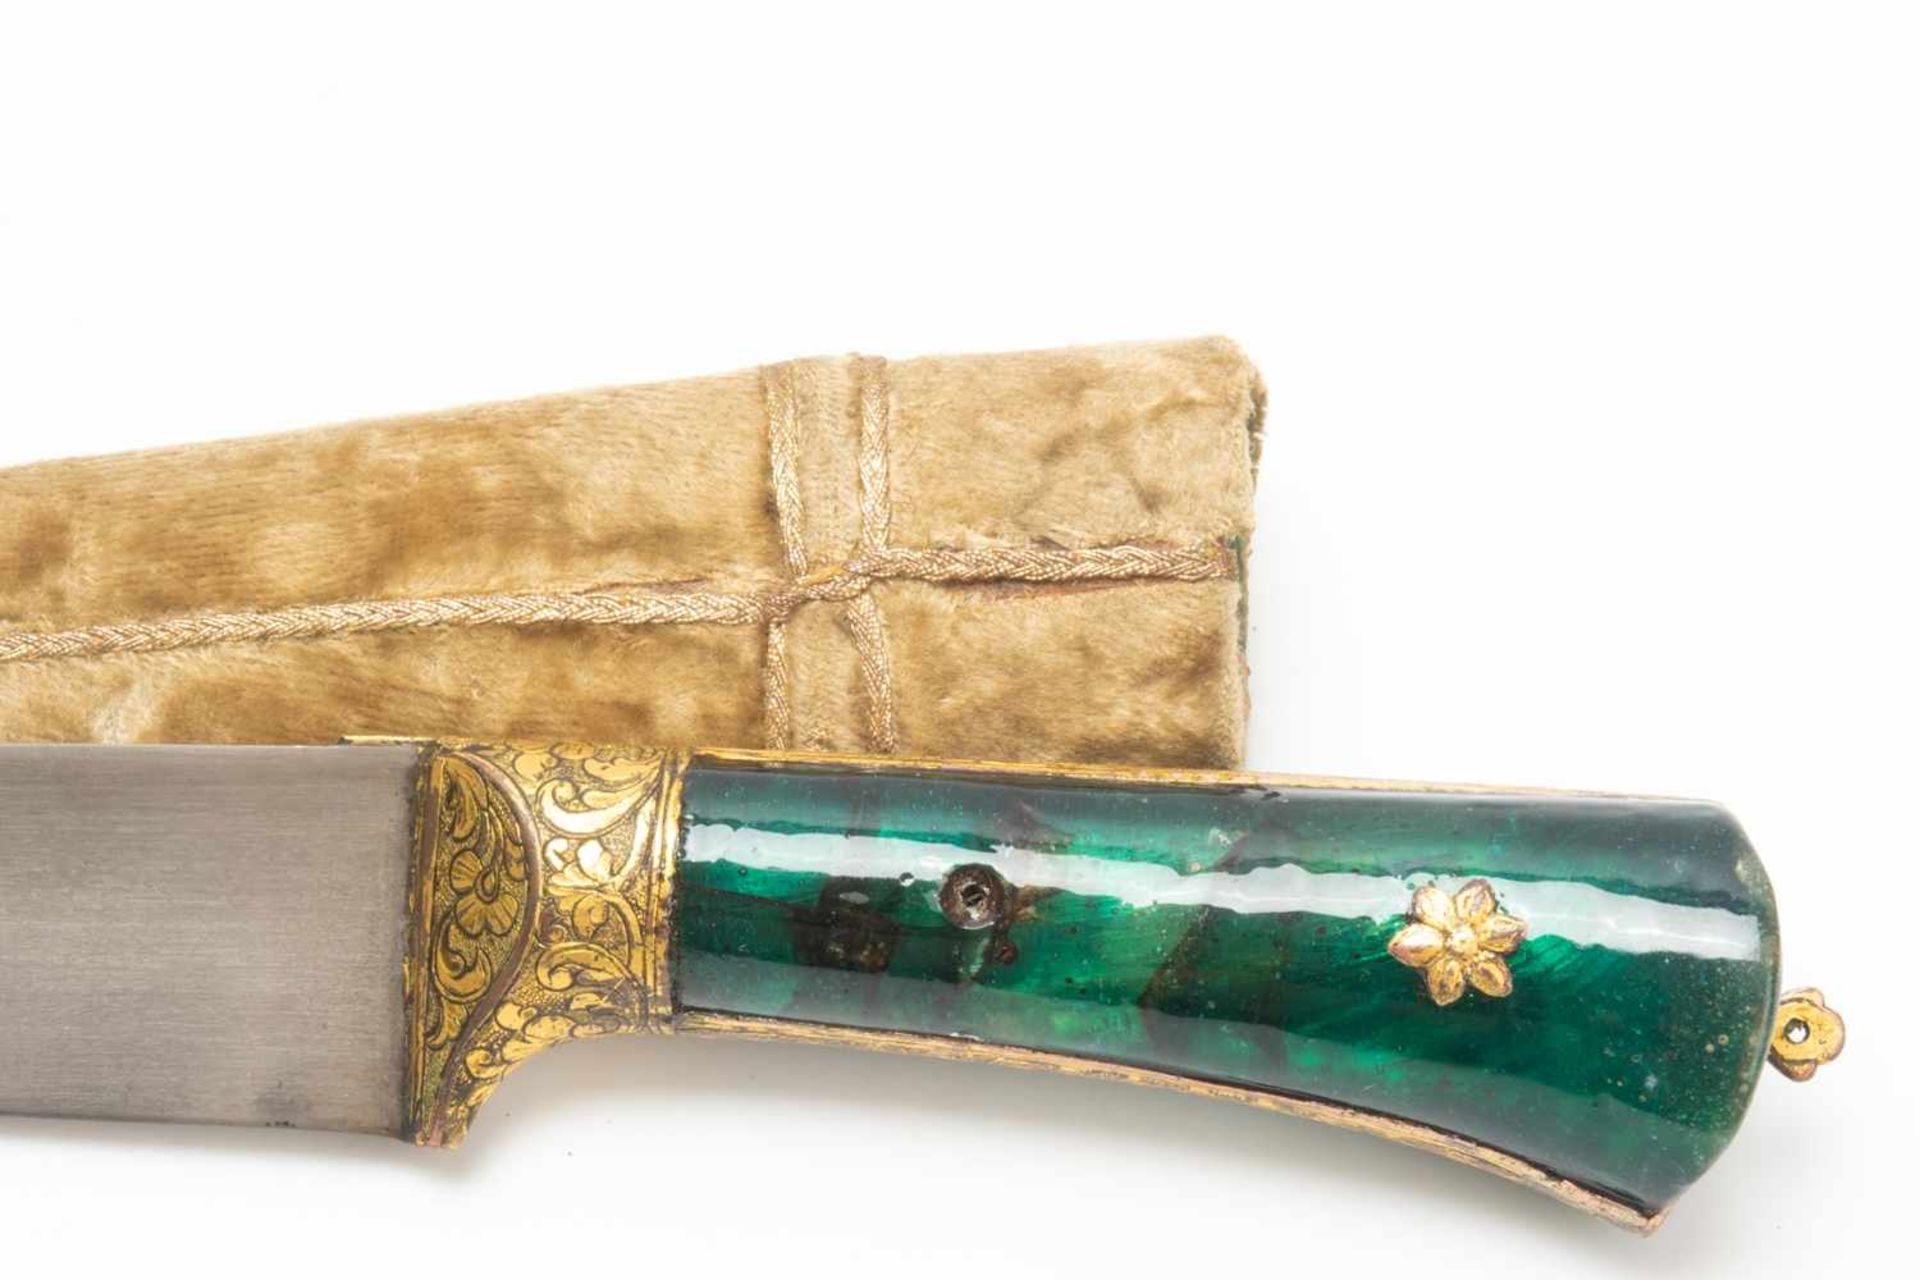 Ornate Indian dagger, pesh-kabz with scabbard - Image 3 of 5